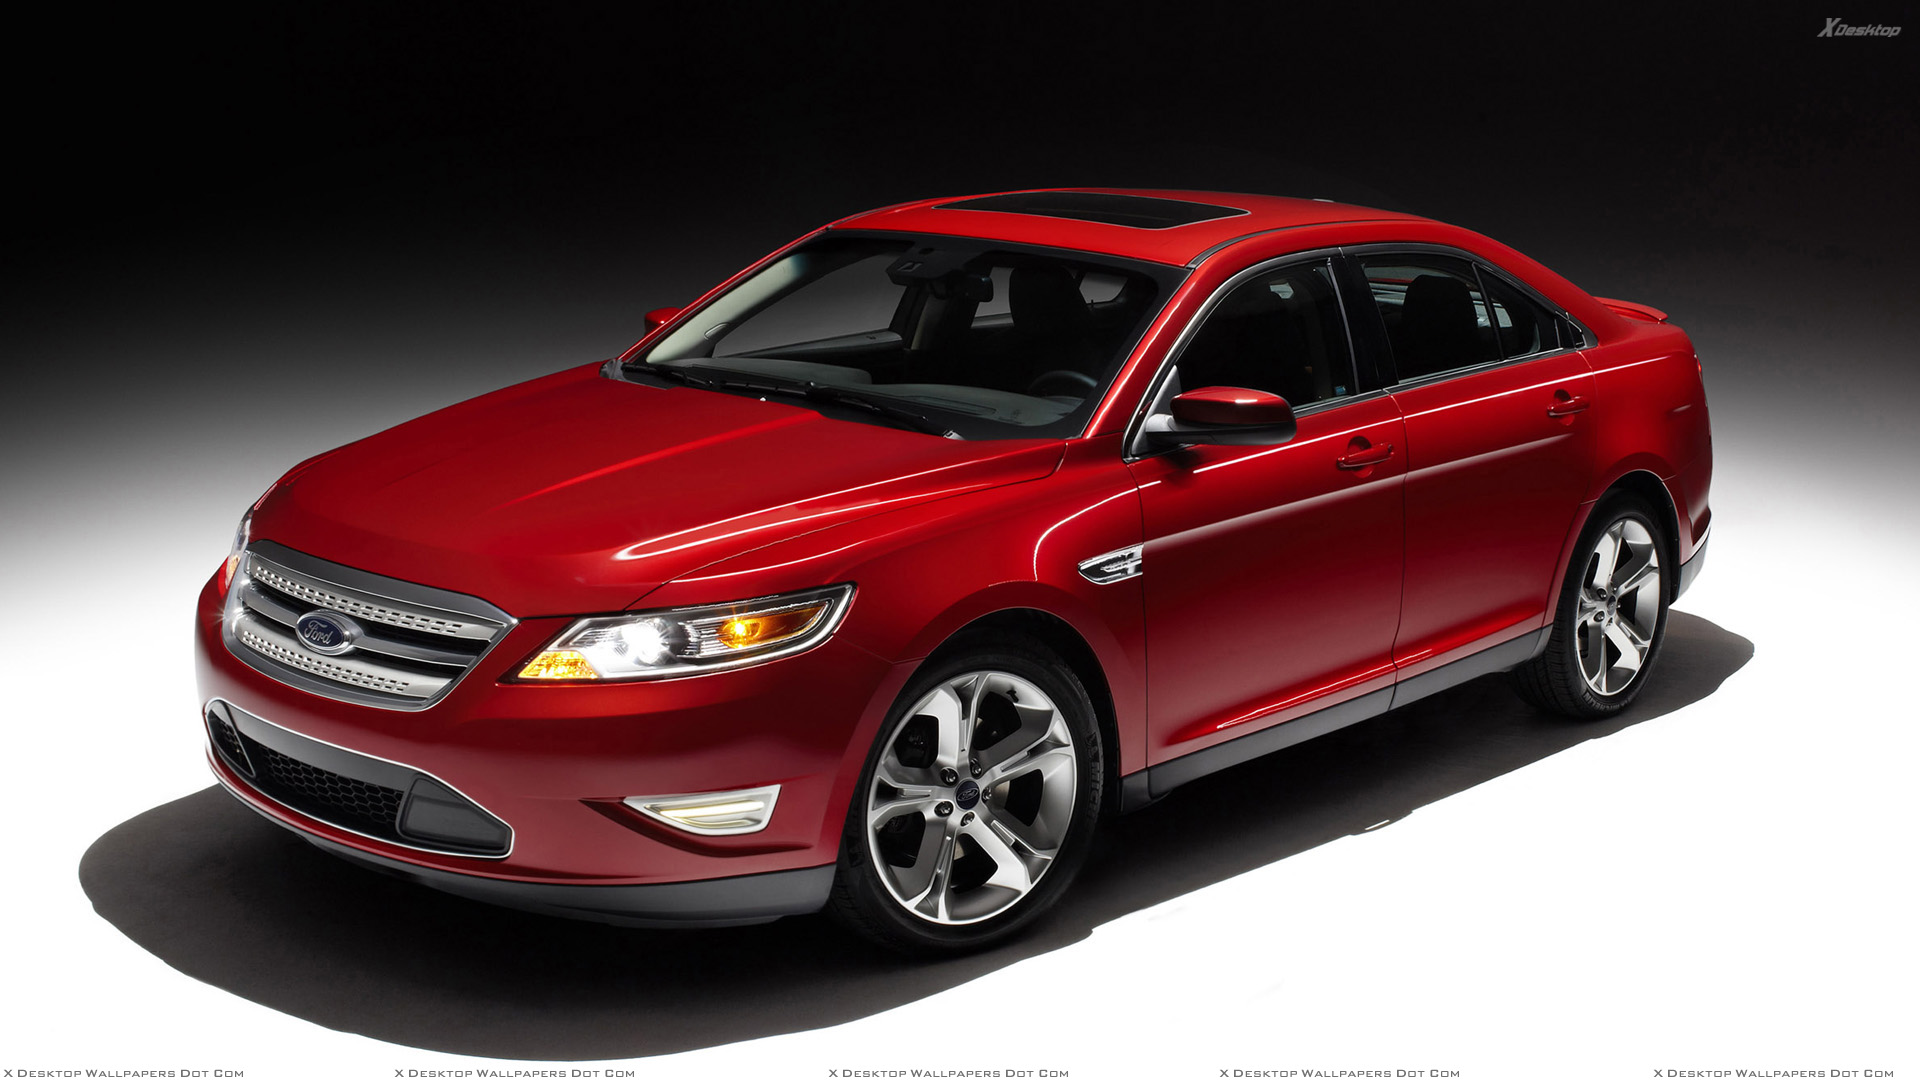 Ford Taurus SHO Wallpapers Photos Images in HD